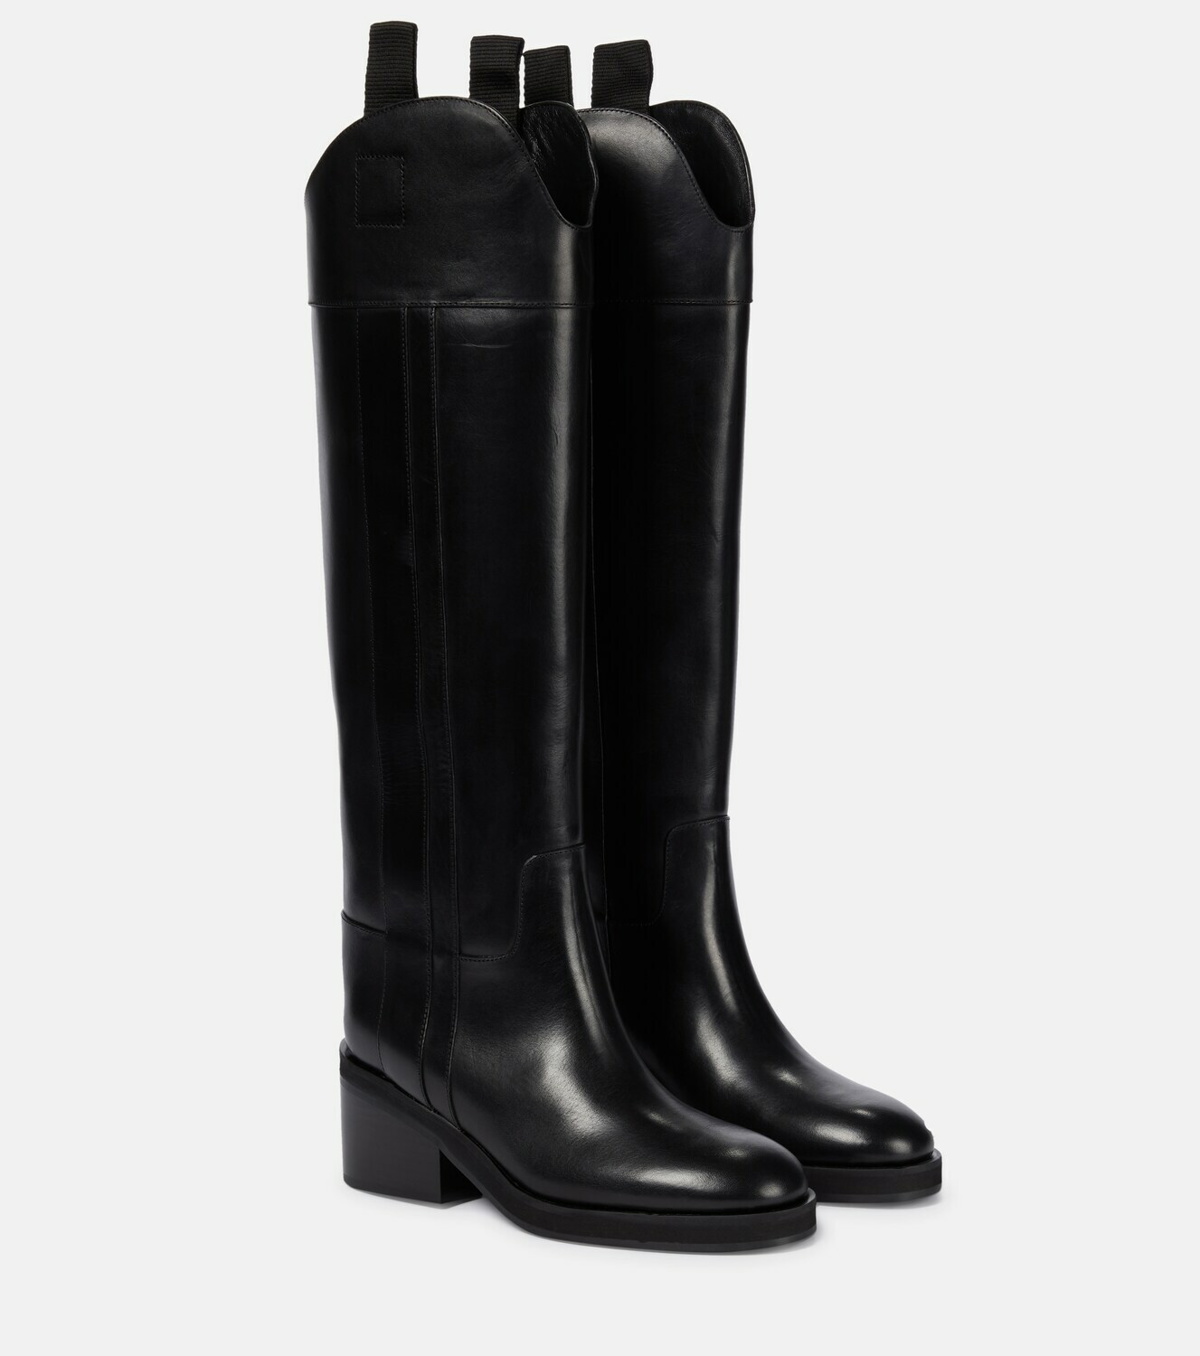 Who 70 leather knee-high boots